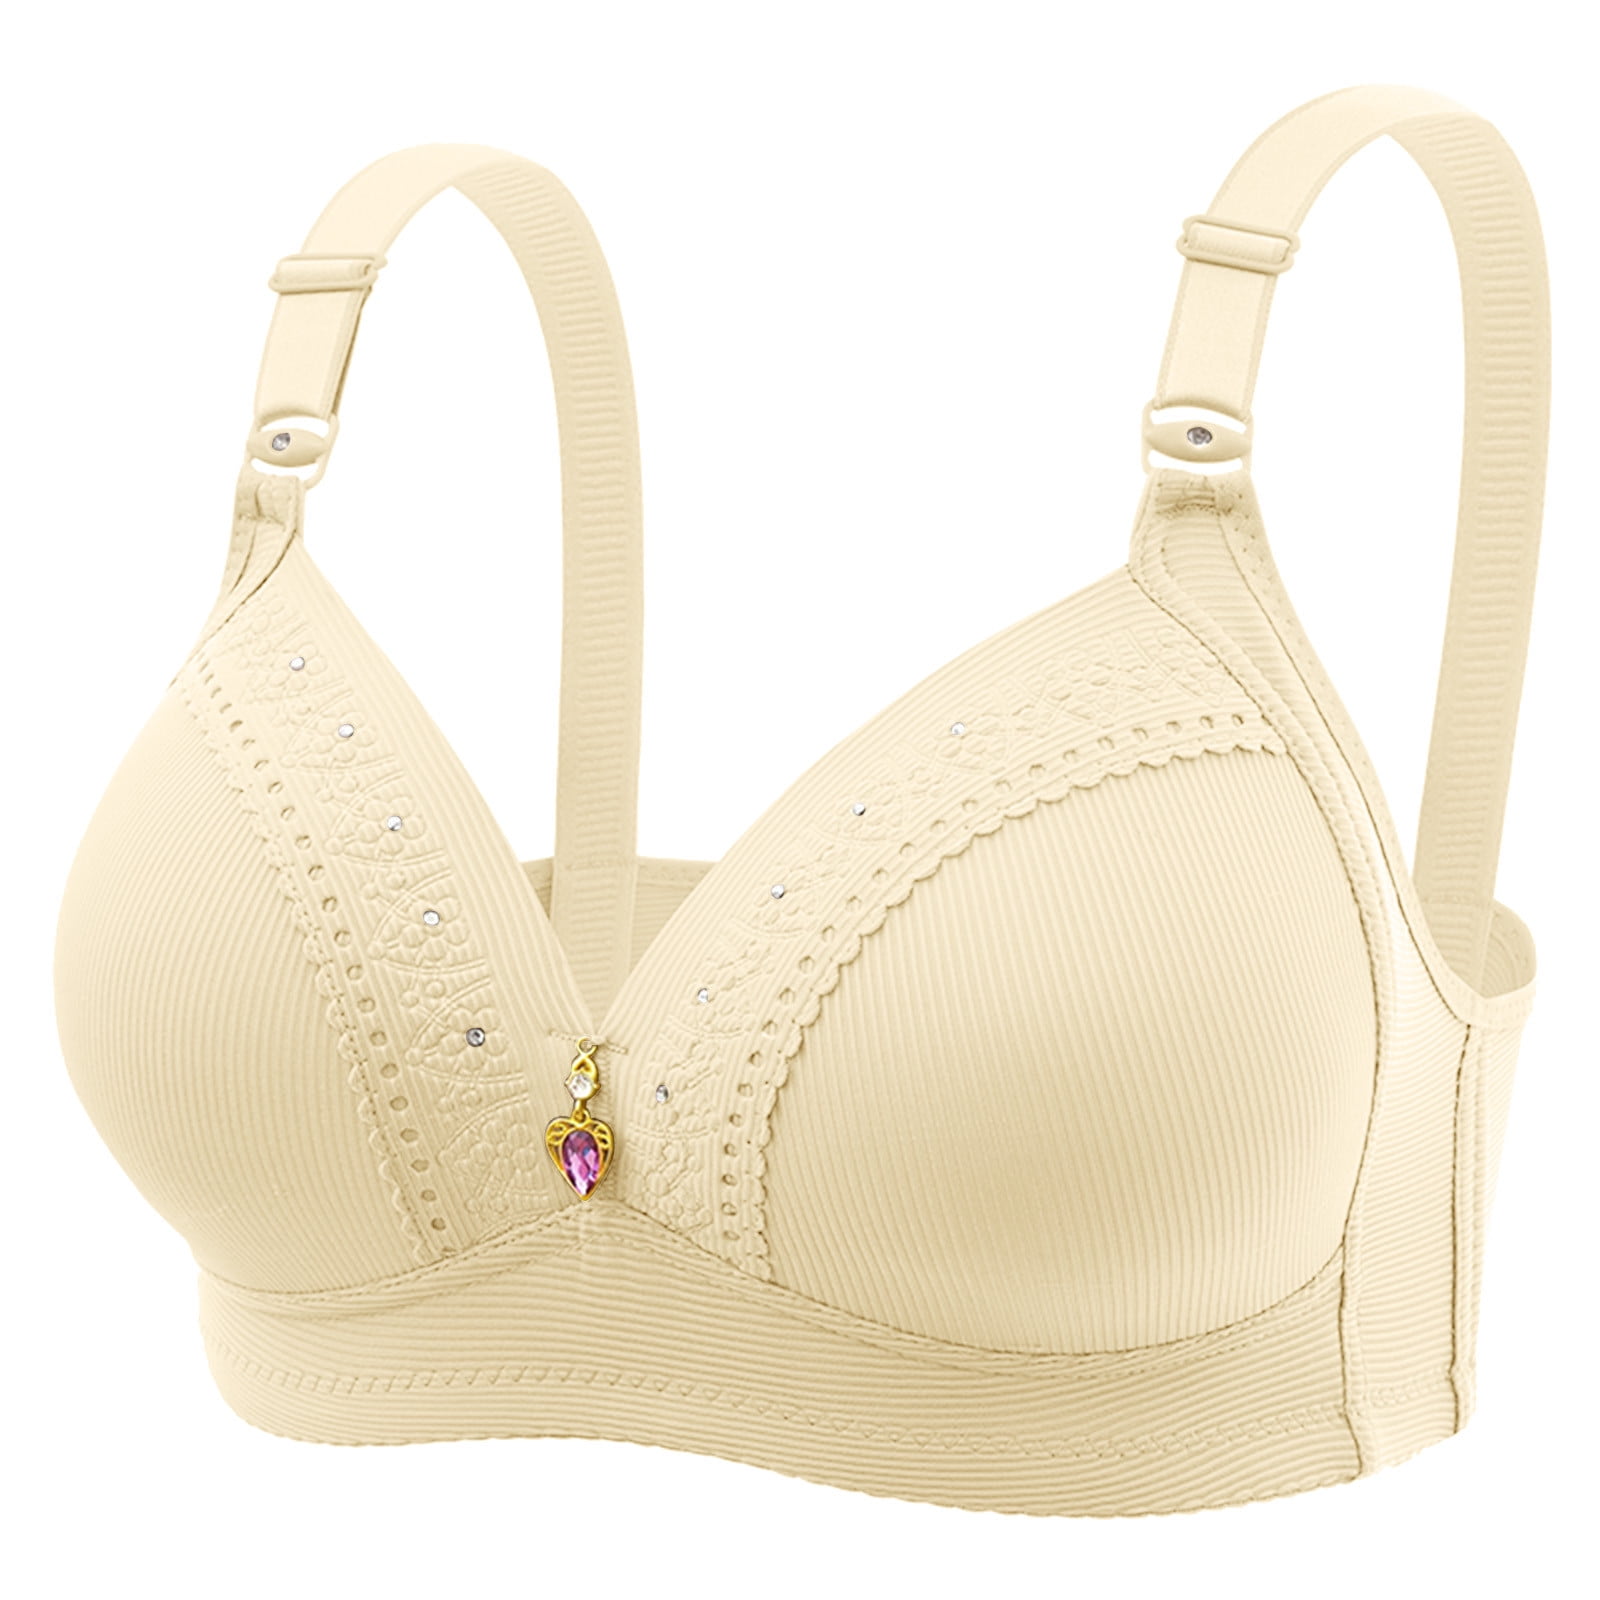 Buy Tweens Padded Non-Wired Full Coverage Minimiser Bra - Beige at